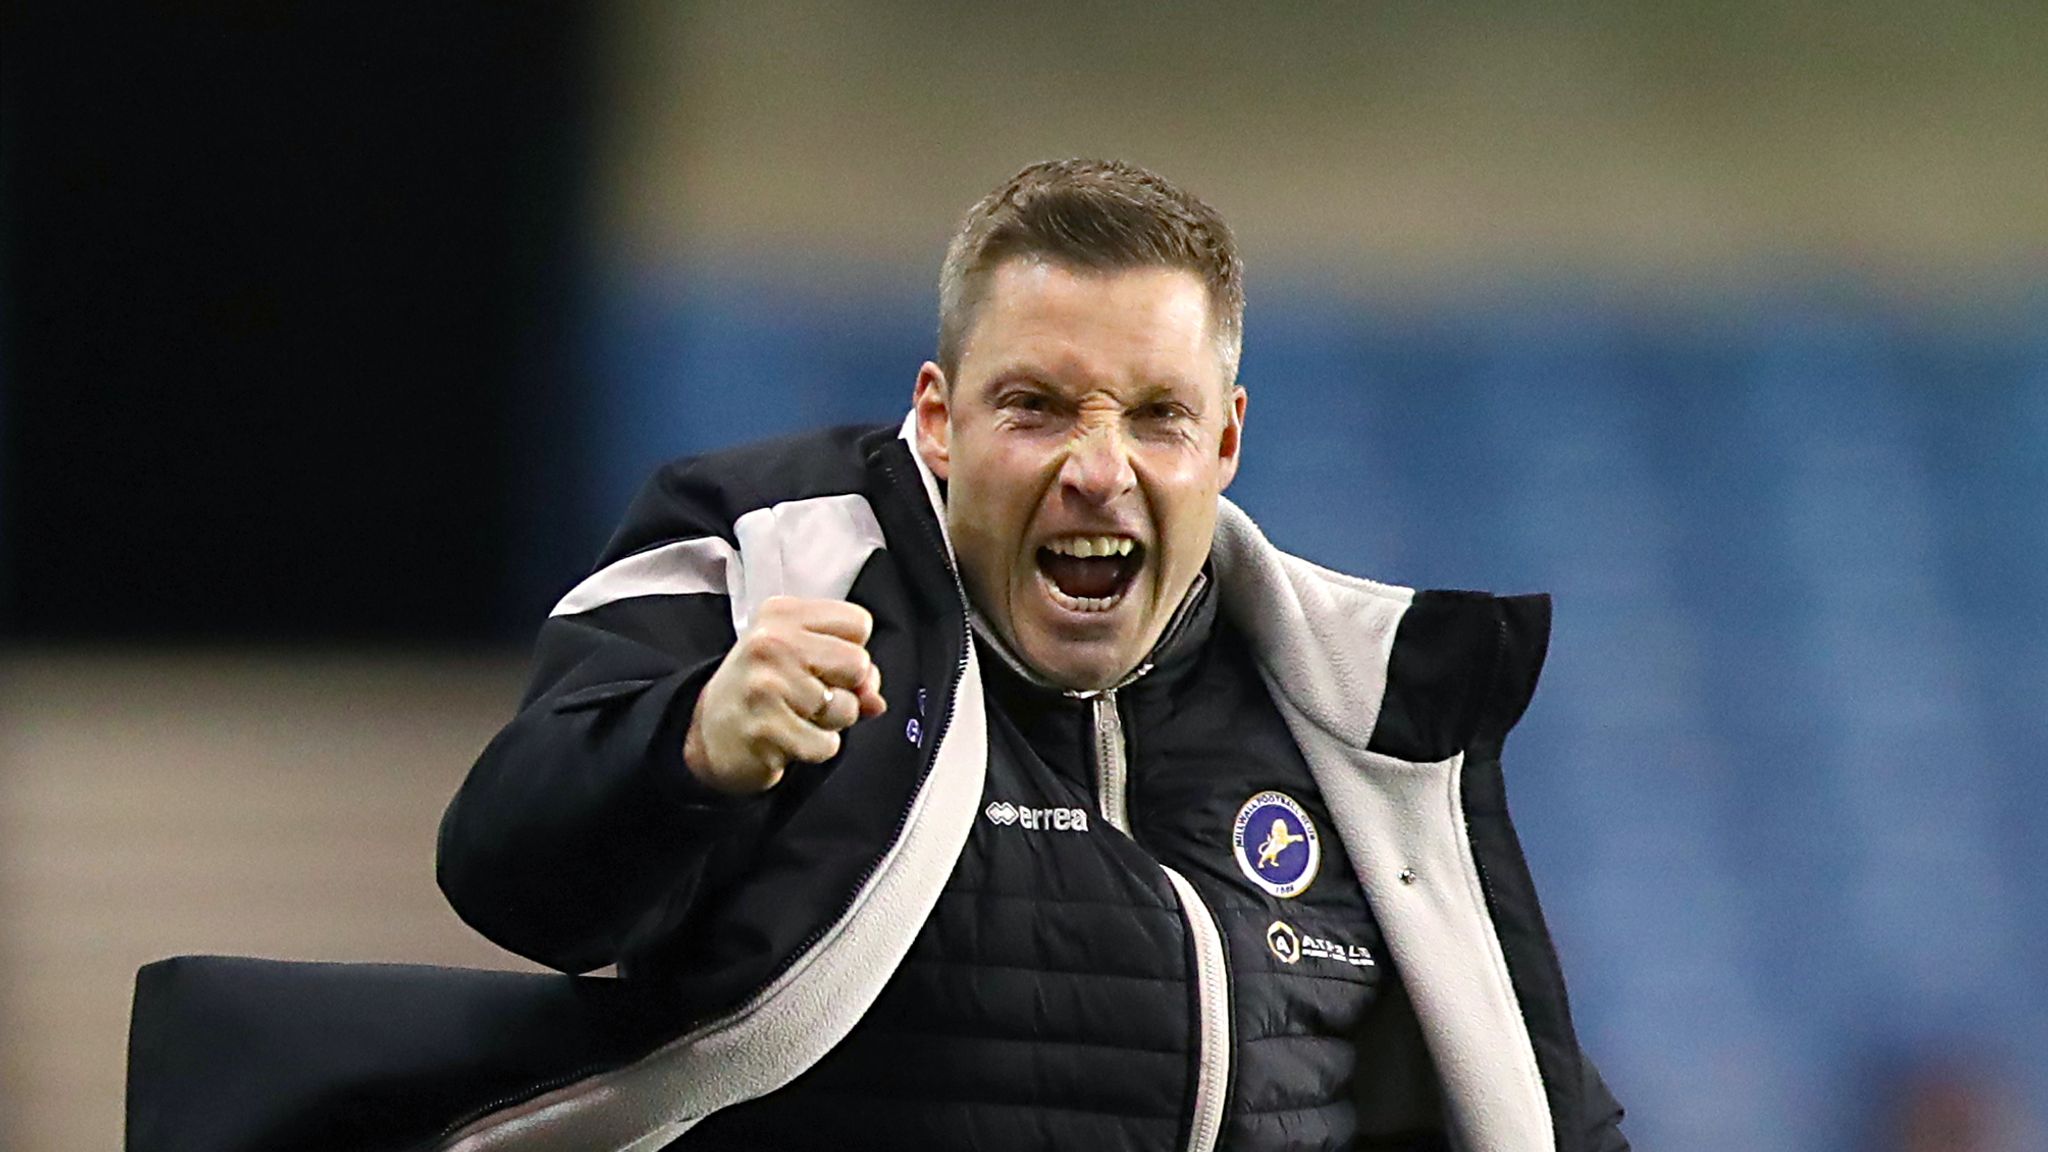 Neil Harris: Millwall have an awesome fear factor